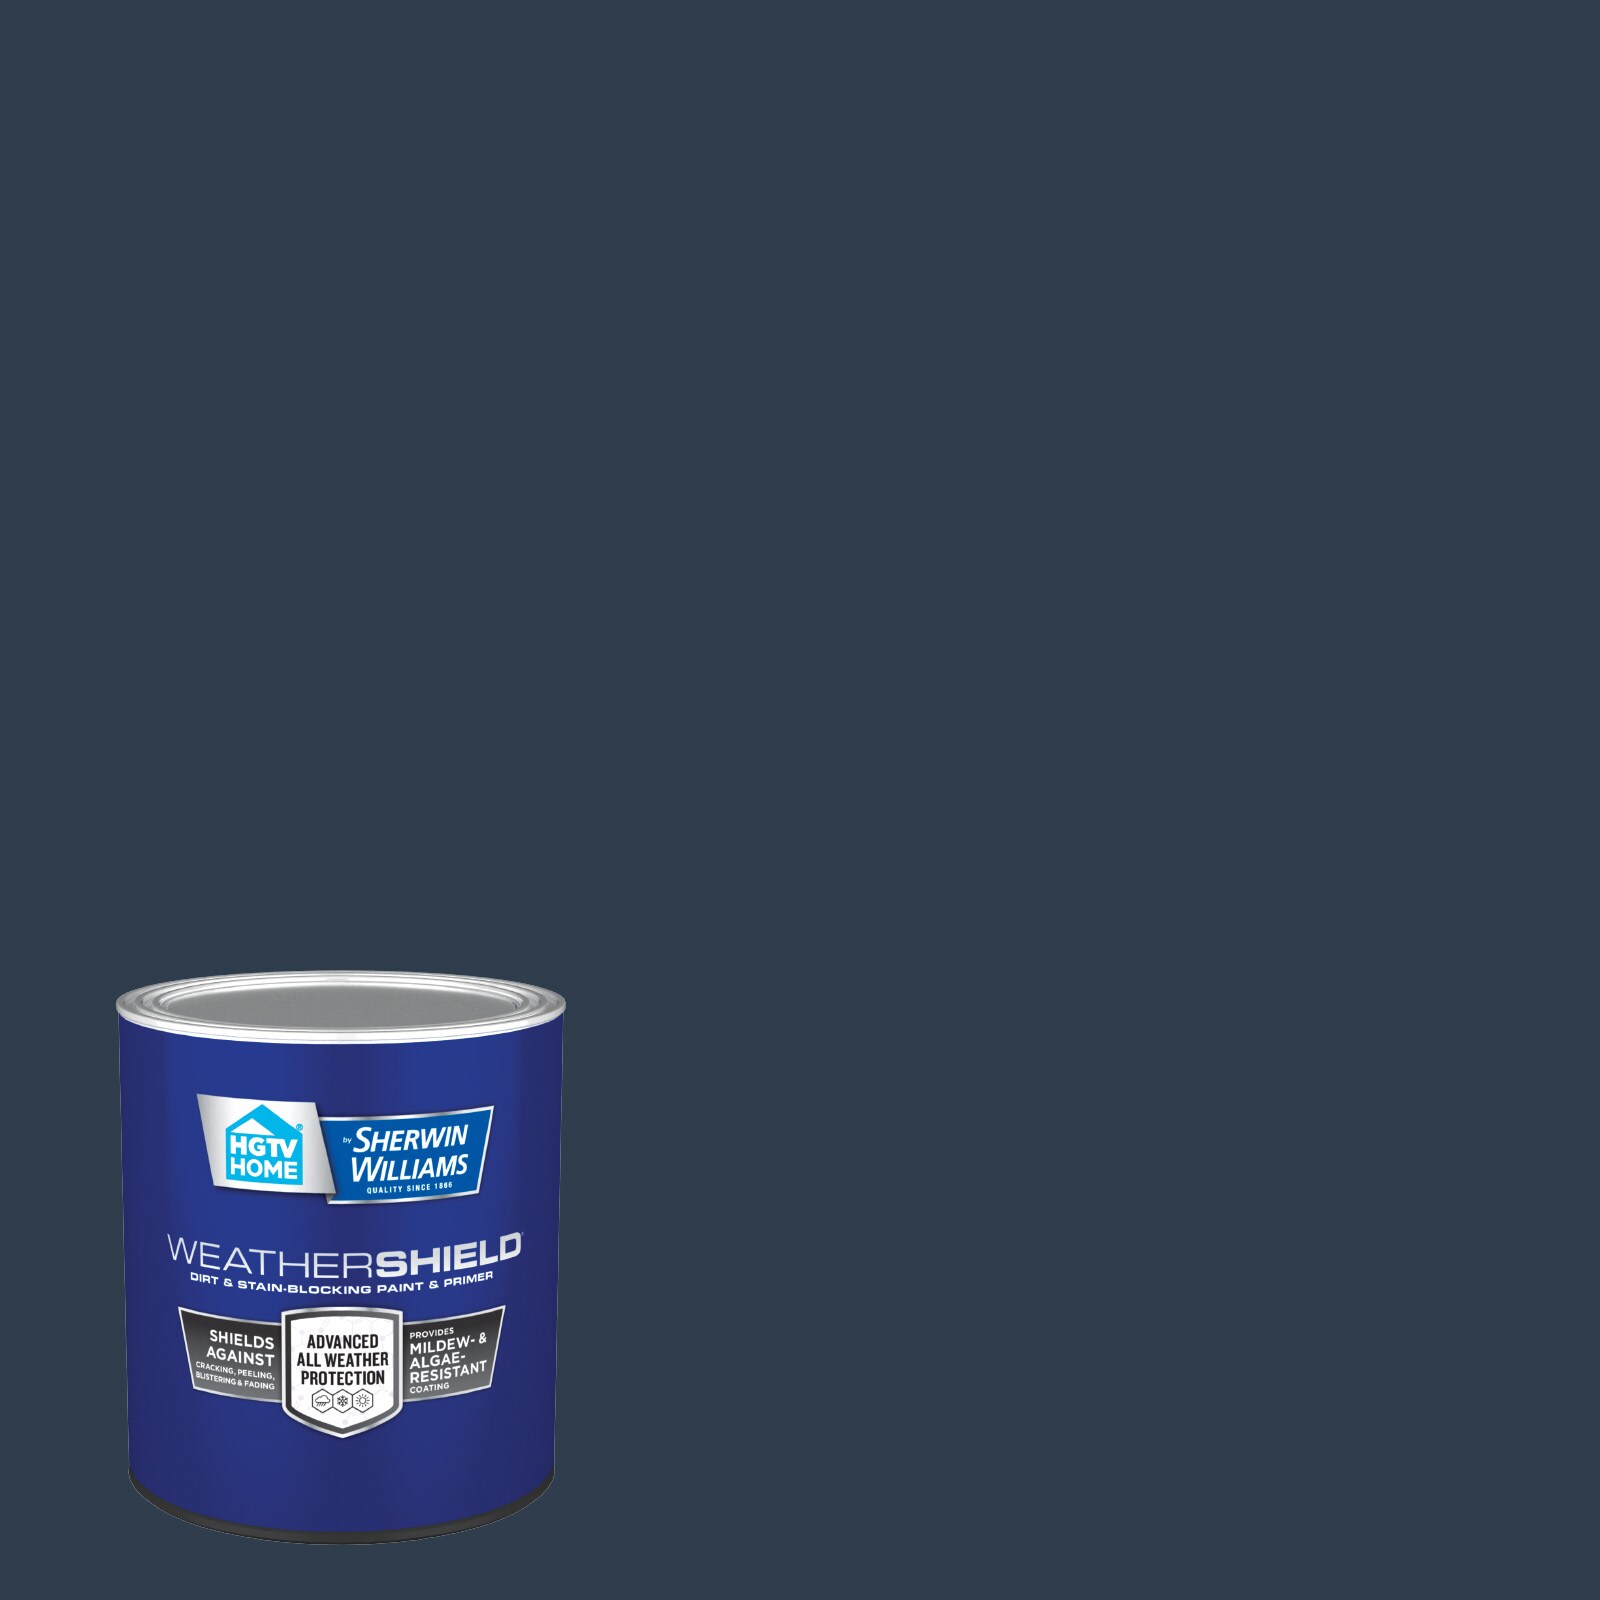 HGTV HOME by Sherwin-Williams 1-quart Exterior Paint at Lowes.com